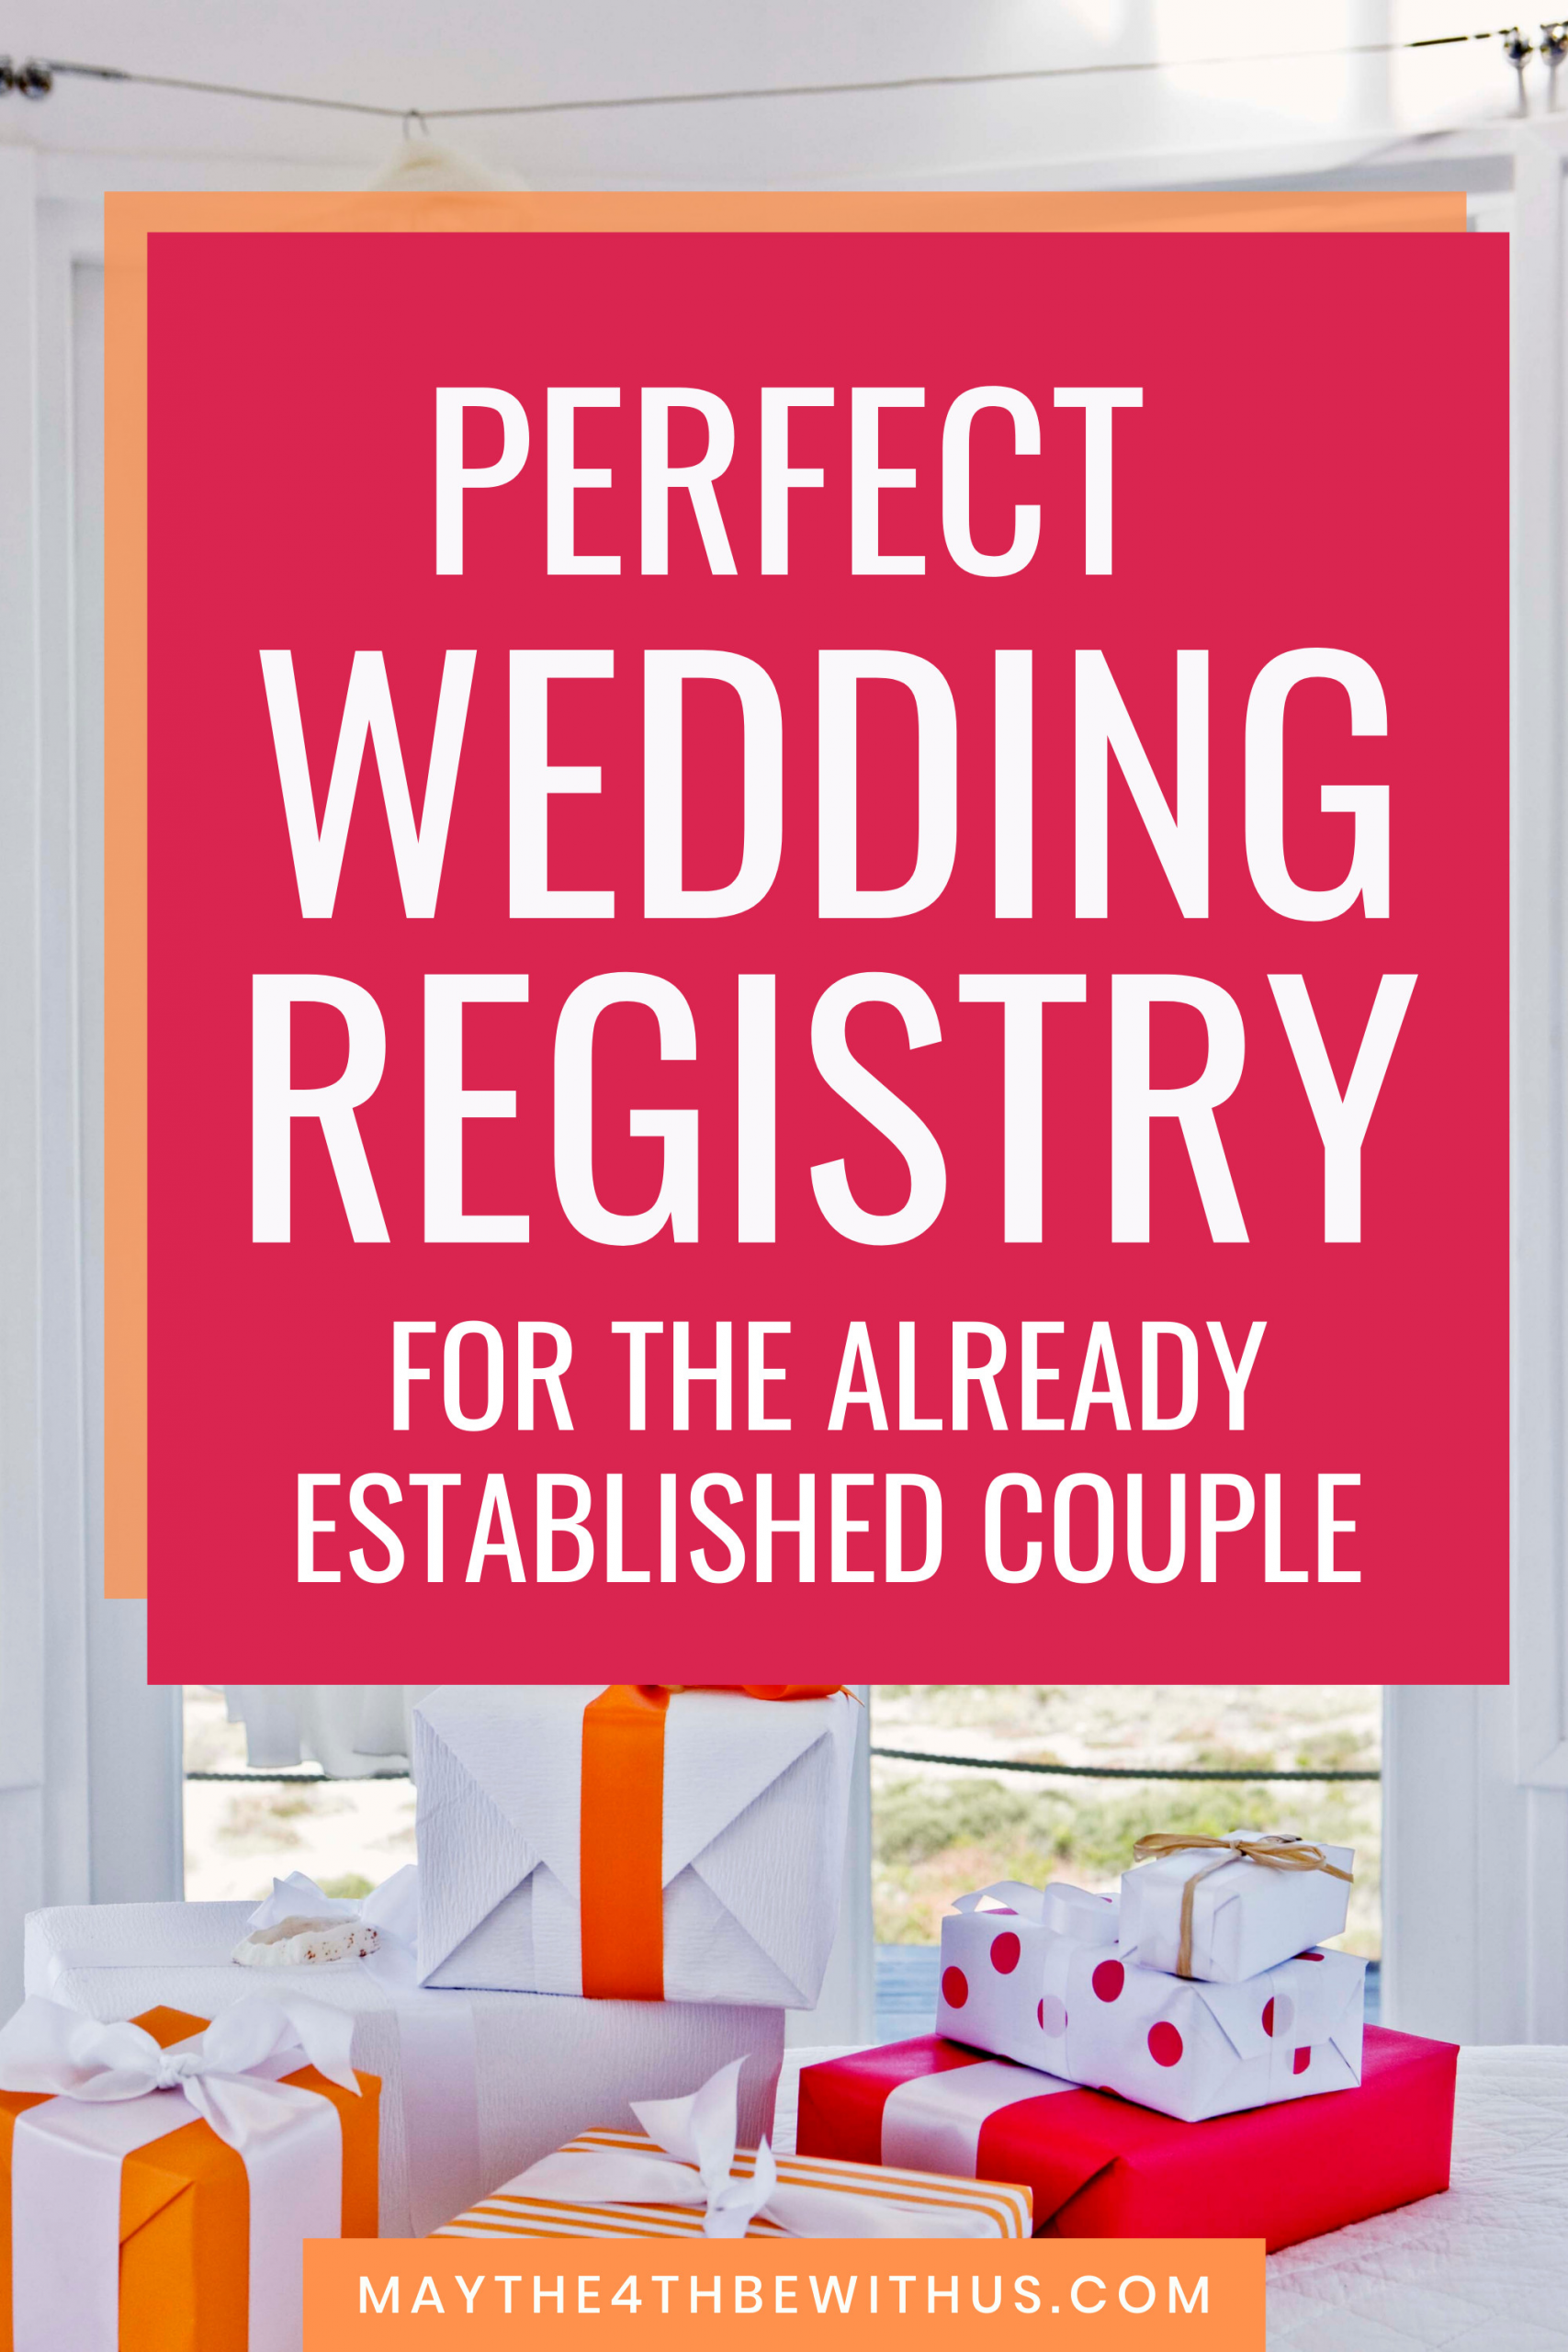 Wedding Gift Ideas For Couples Living Together
 The Perfect Wedding Registry for a Couple already living